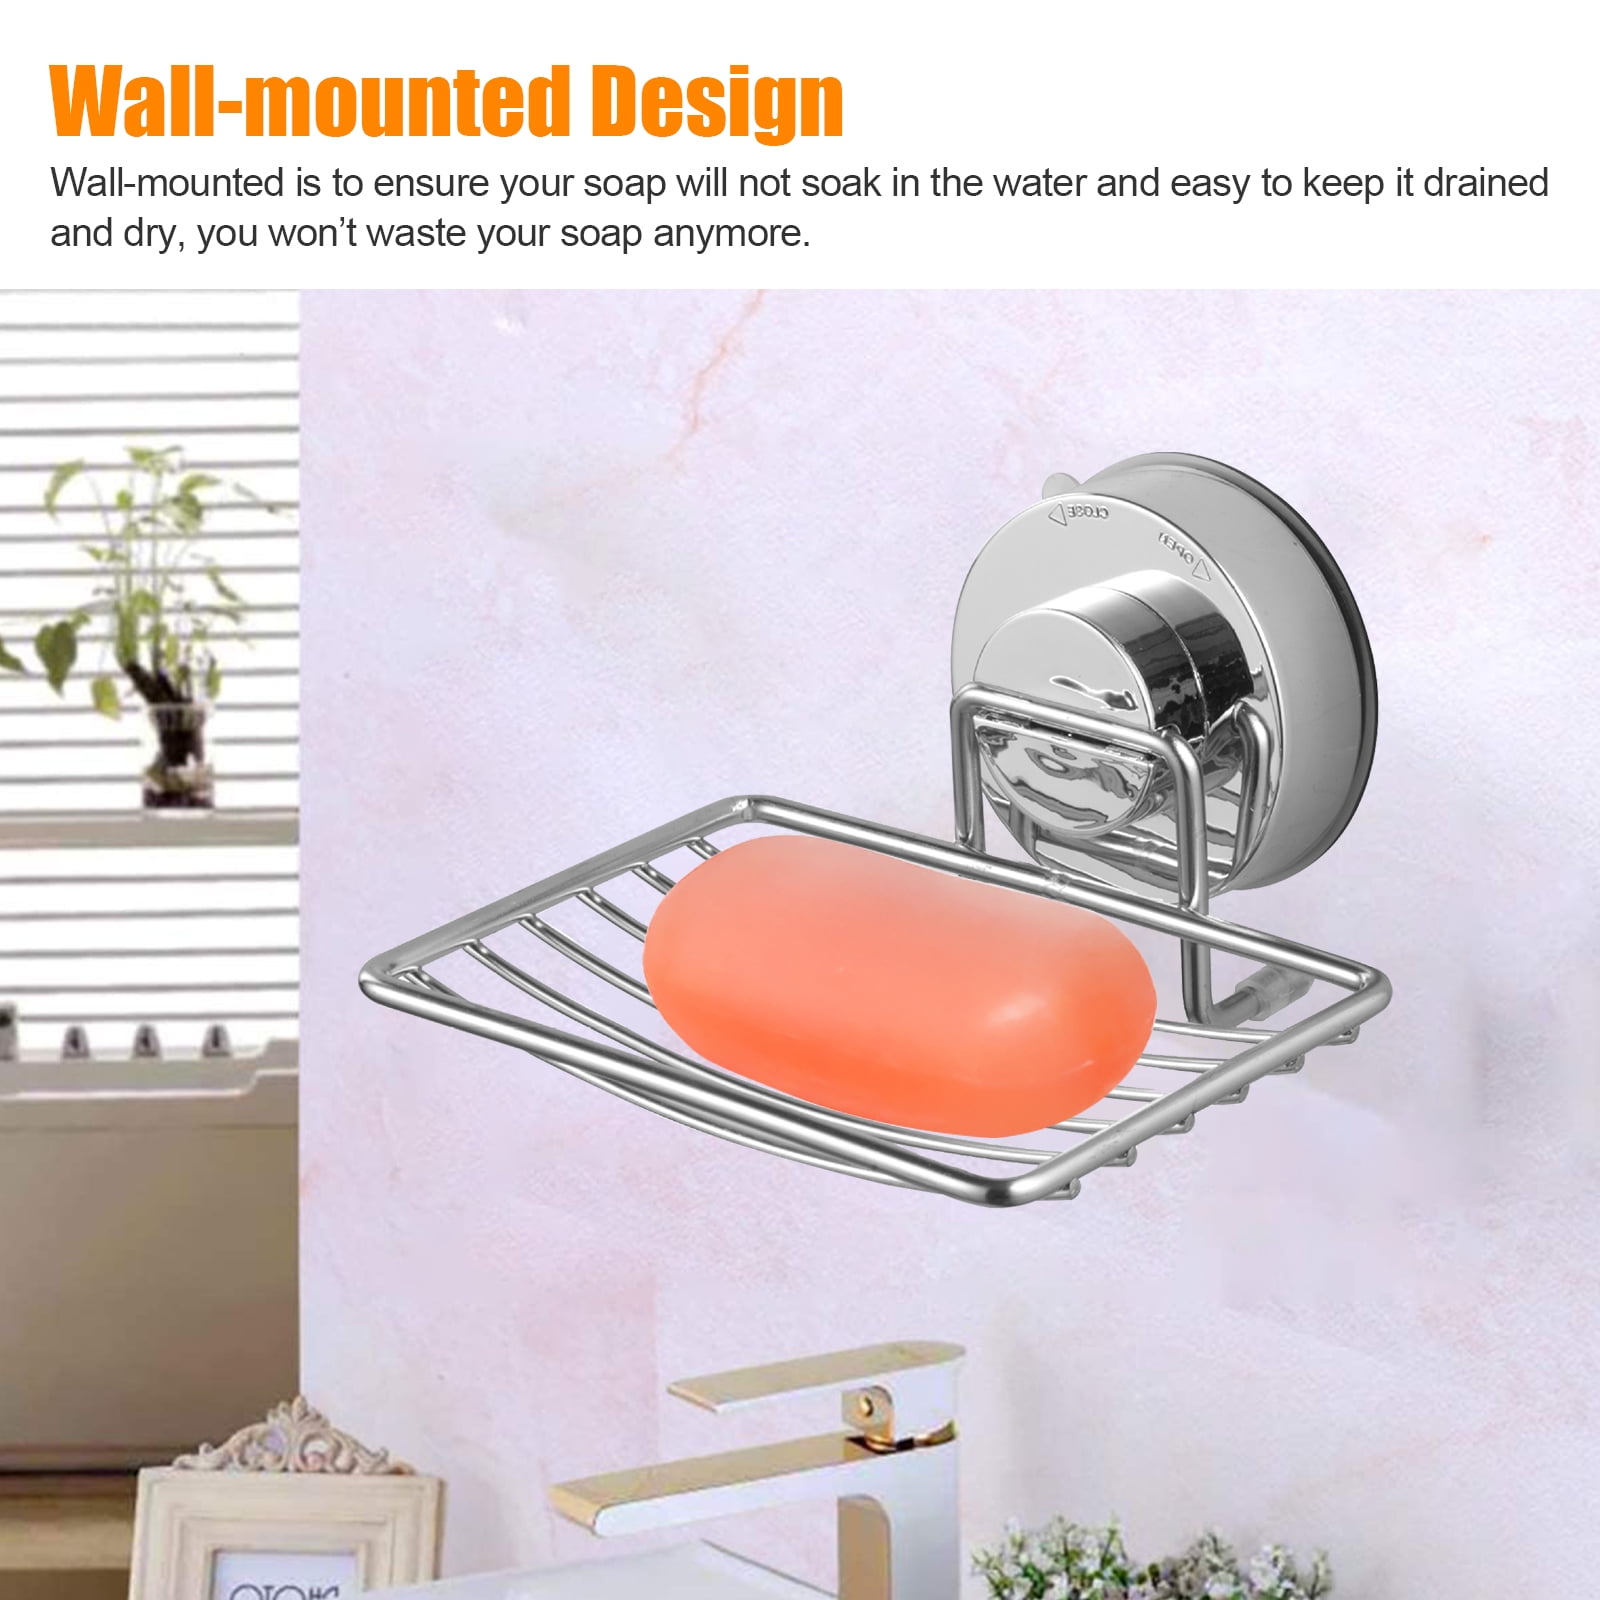 Stainless Steel Soap Box Vacuum Suction Cup Soap Basket Soap Dish Holder ssfsaf 